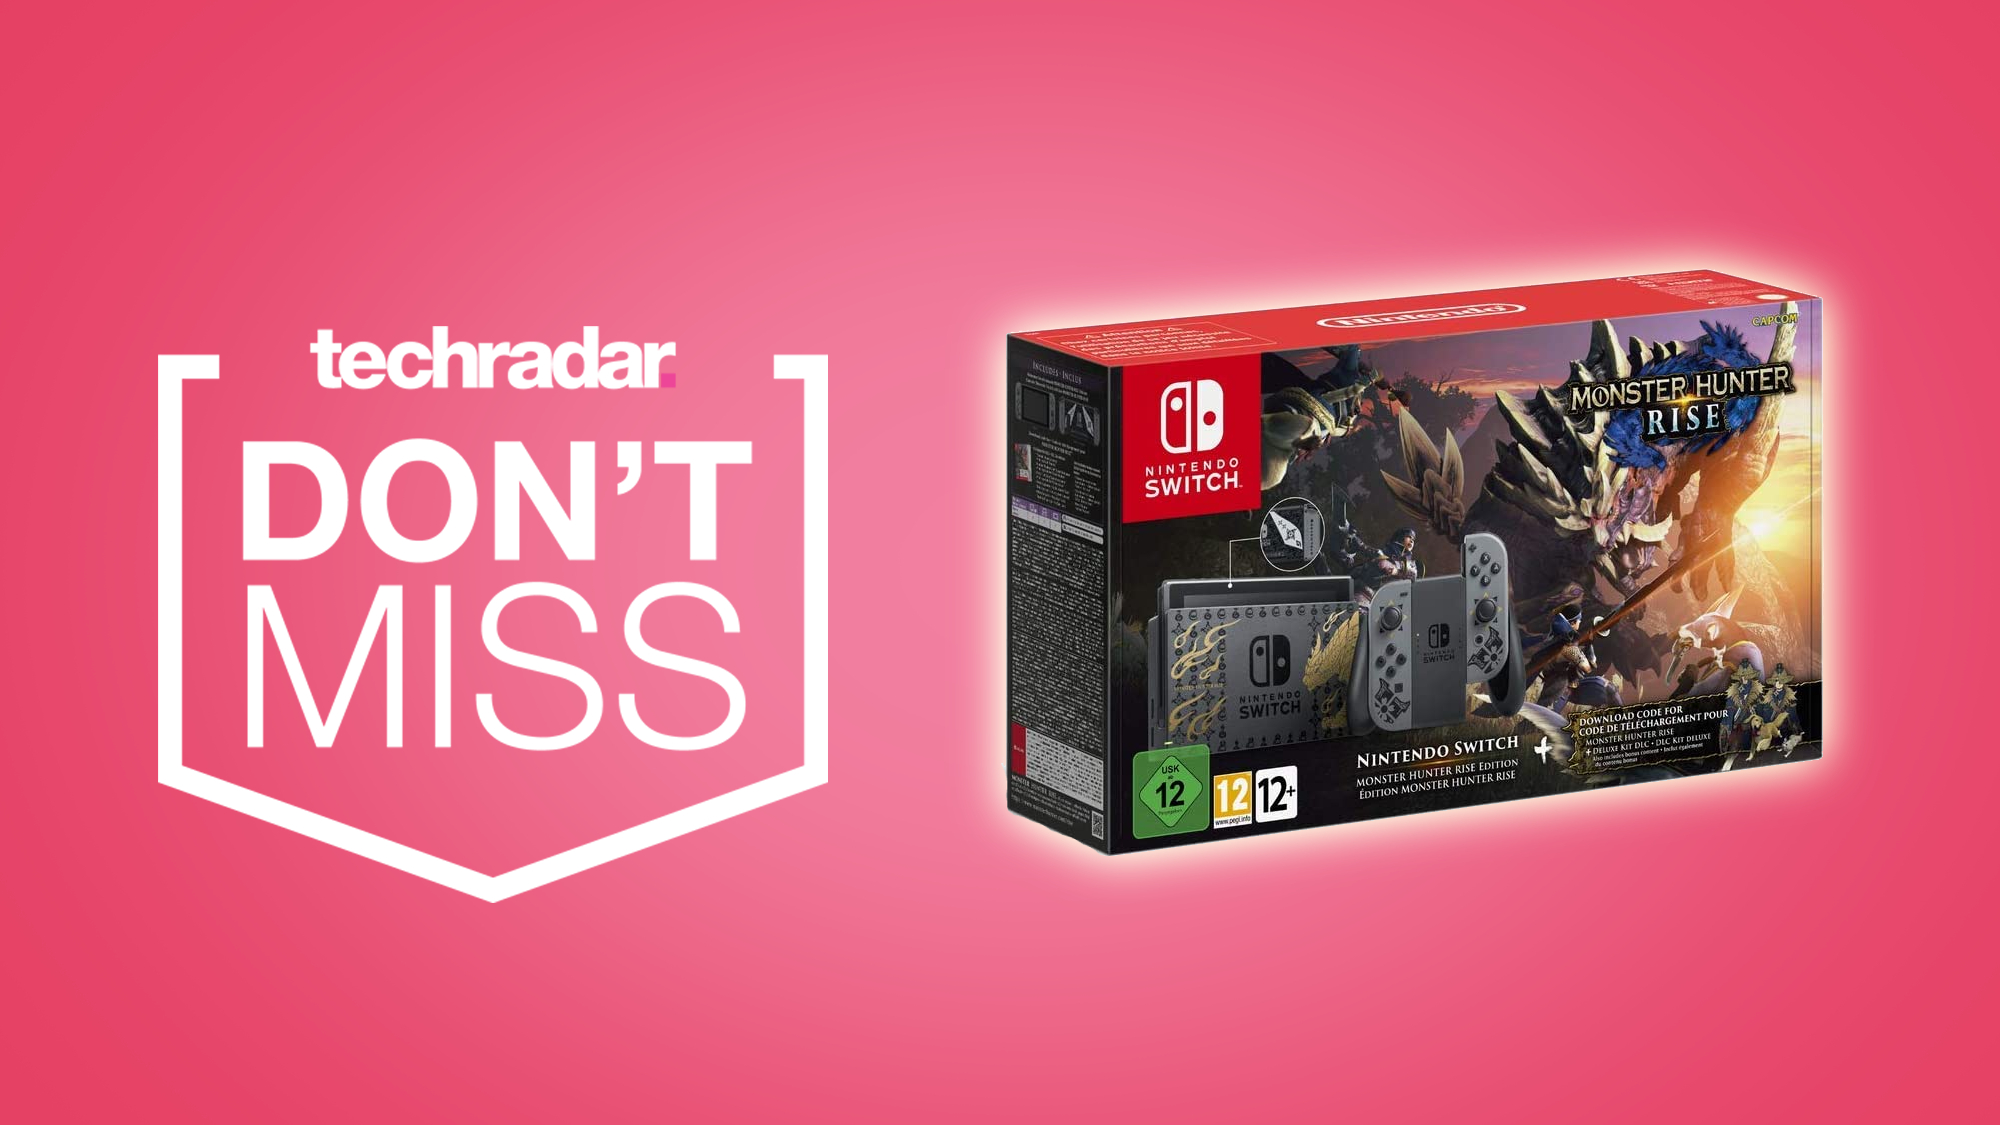 Rise | Hunter TechRadar pre-order Monster before Nintendo its gone now can Switch You the